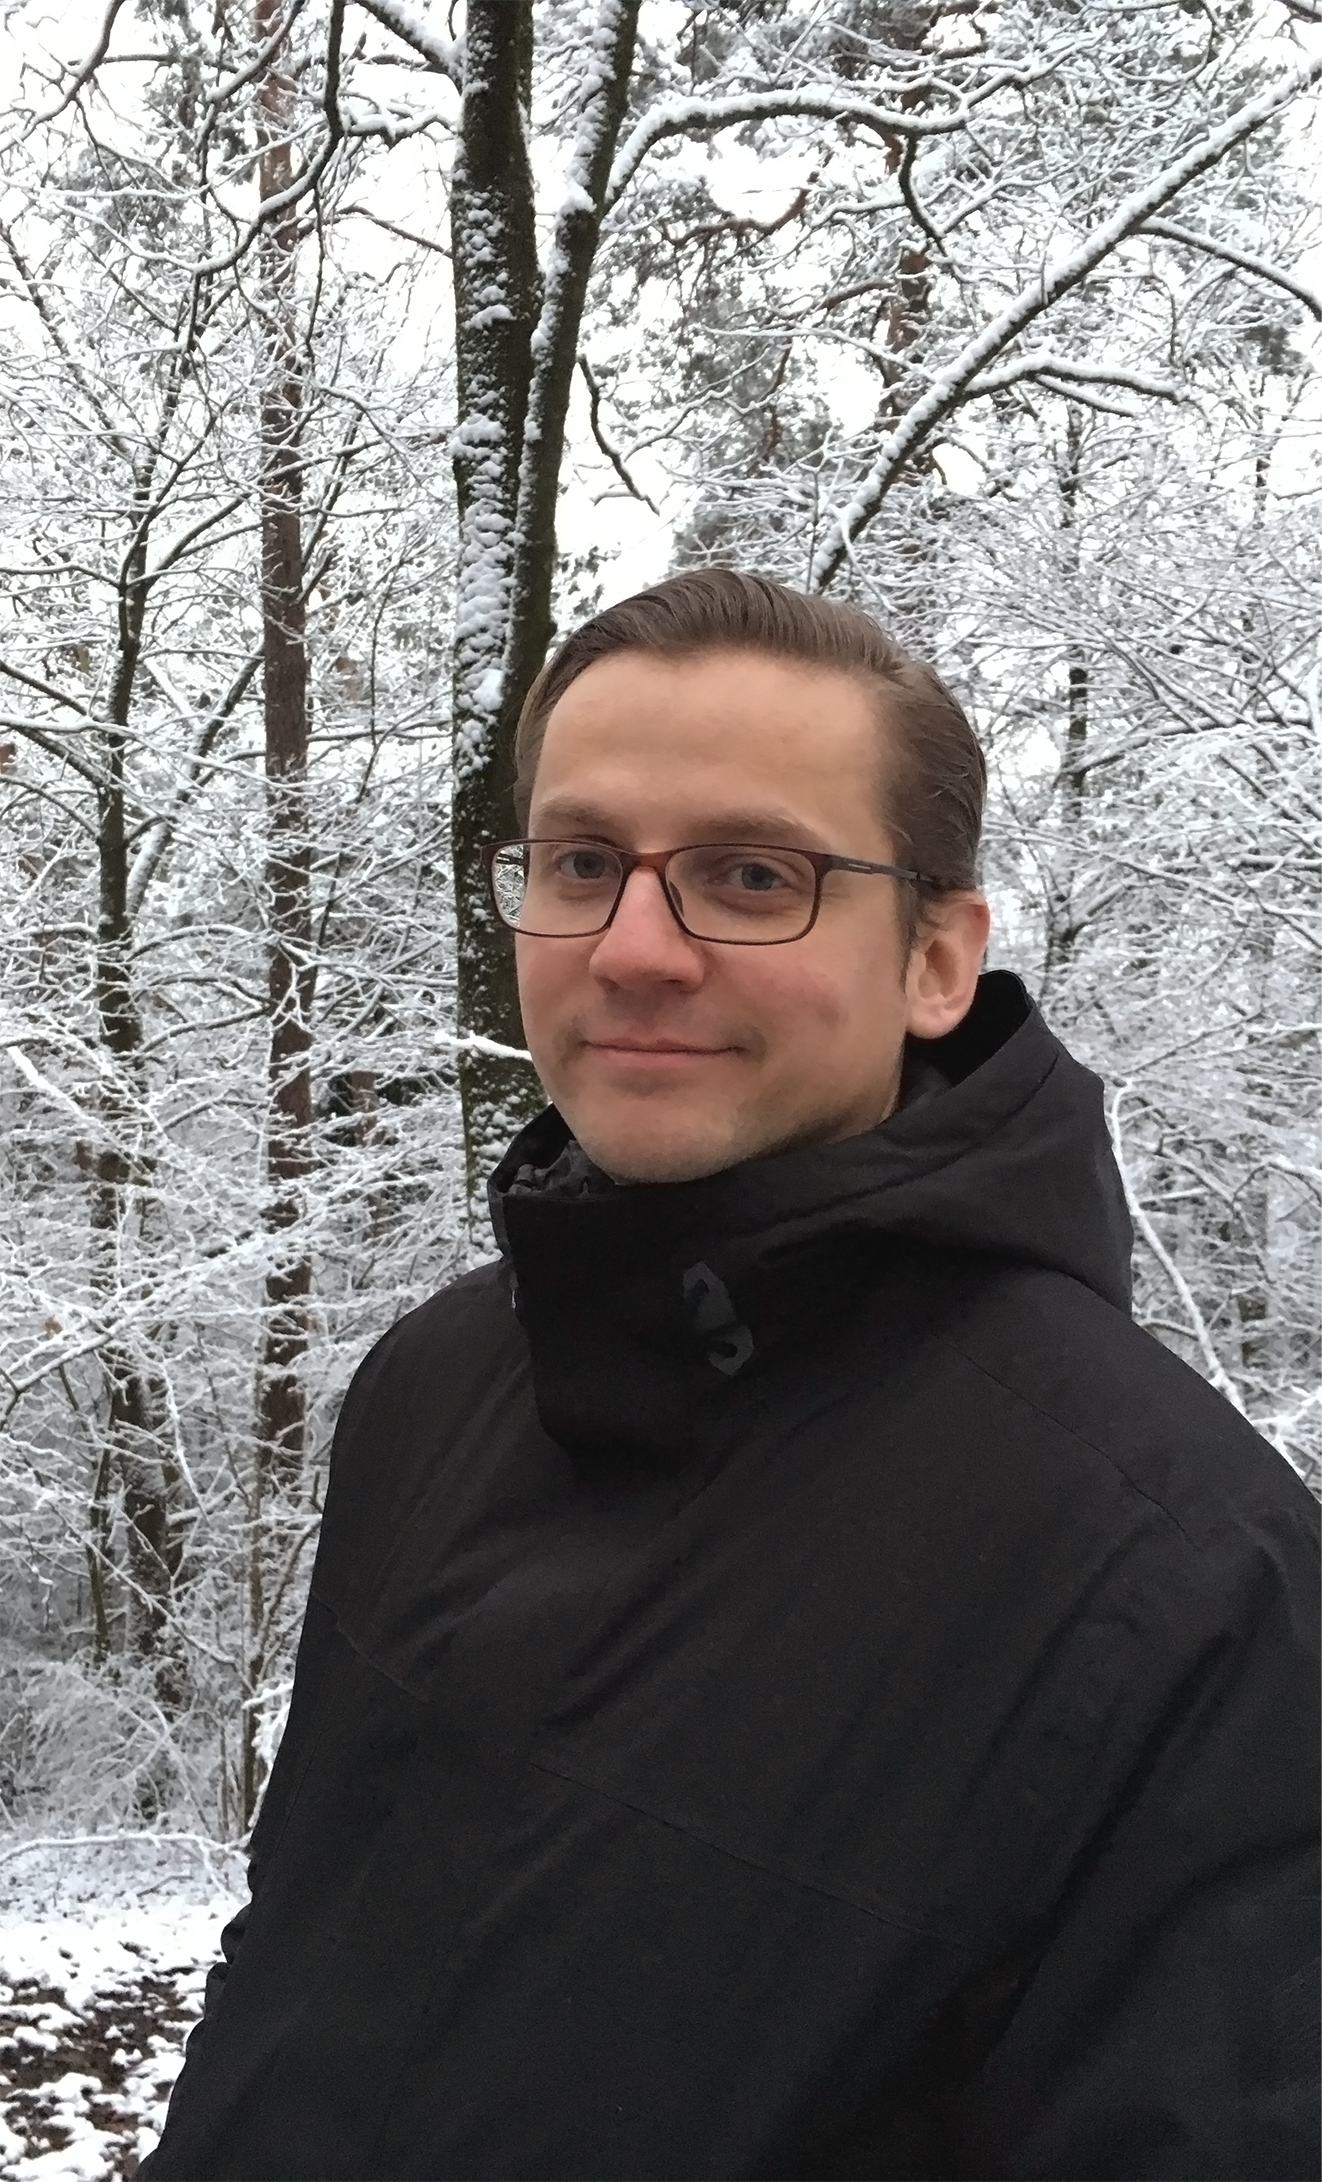 Picture of author of the course Matas Ubarevicius in winter